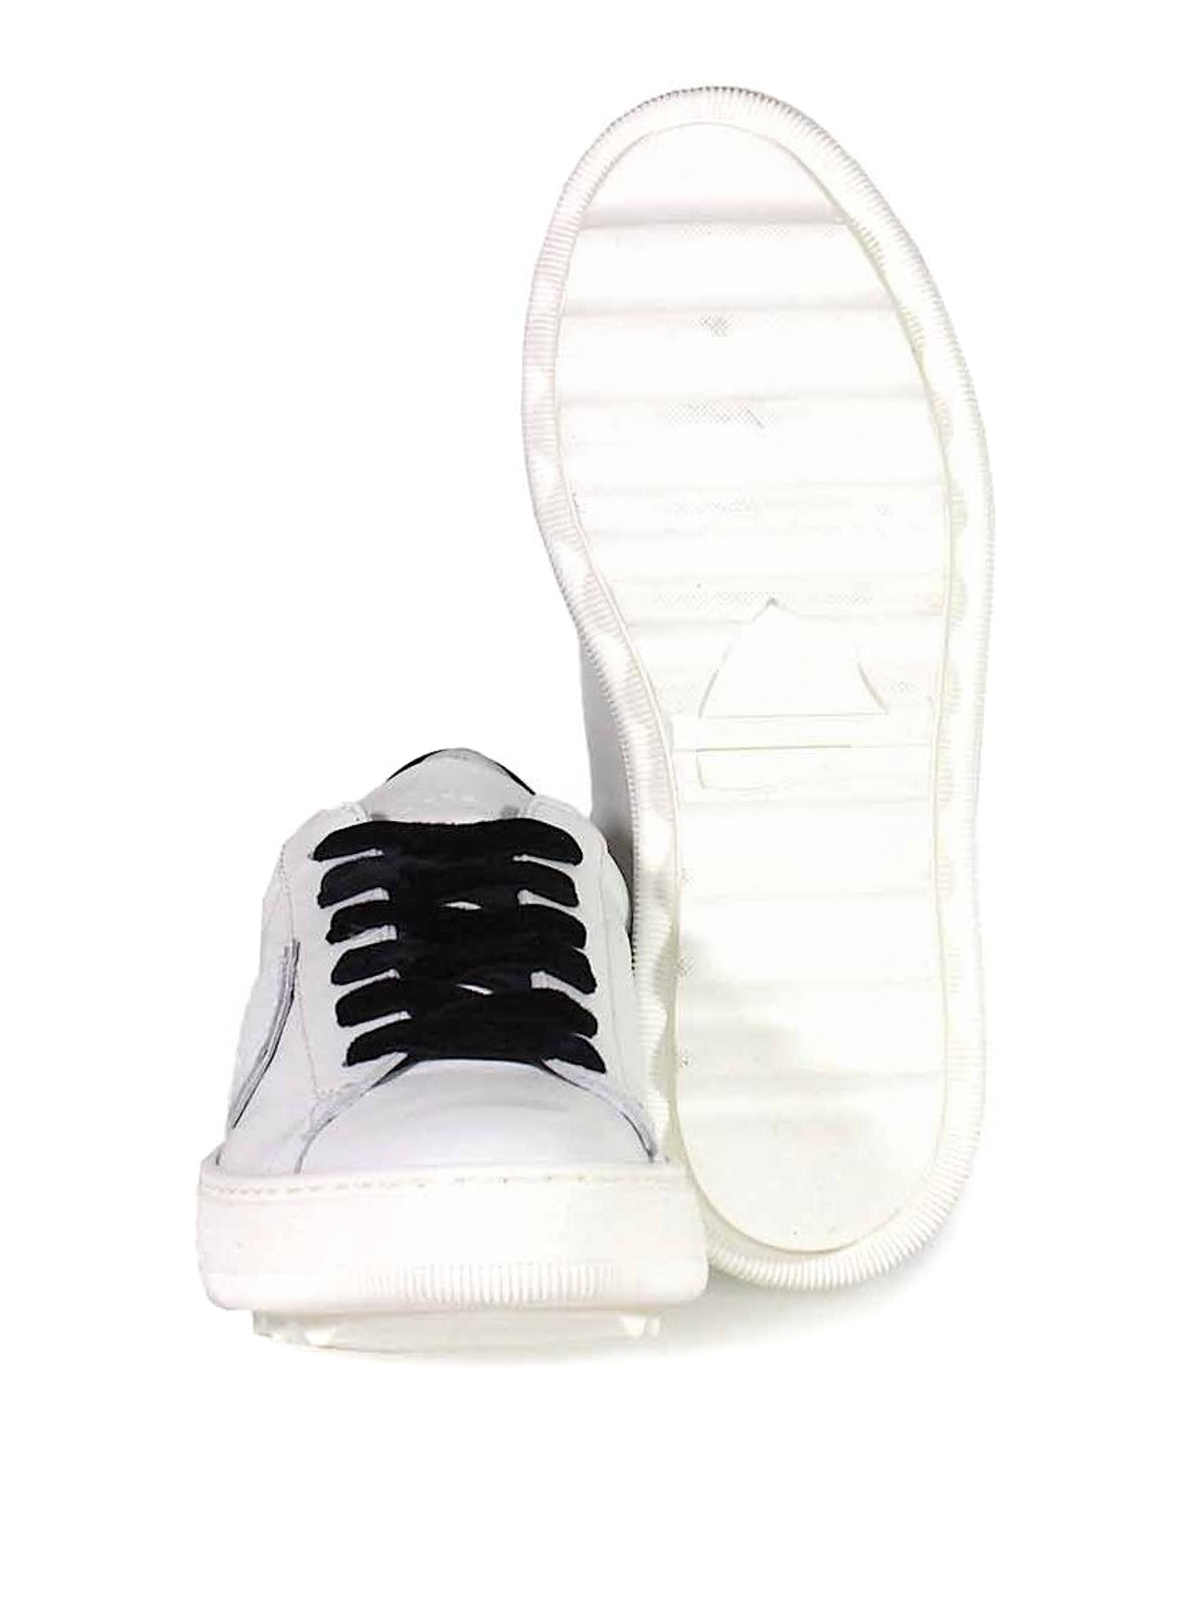 Madeleine black laces sneakers 